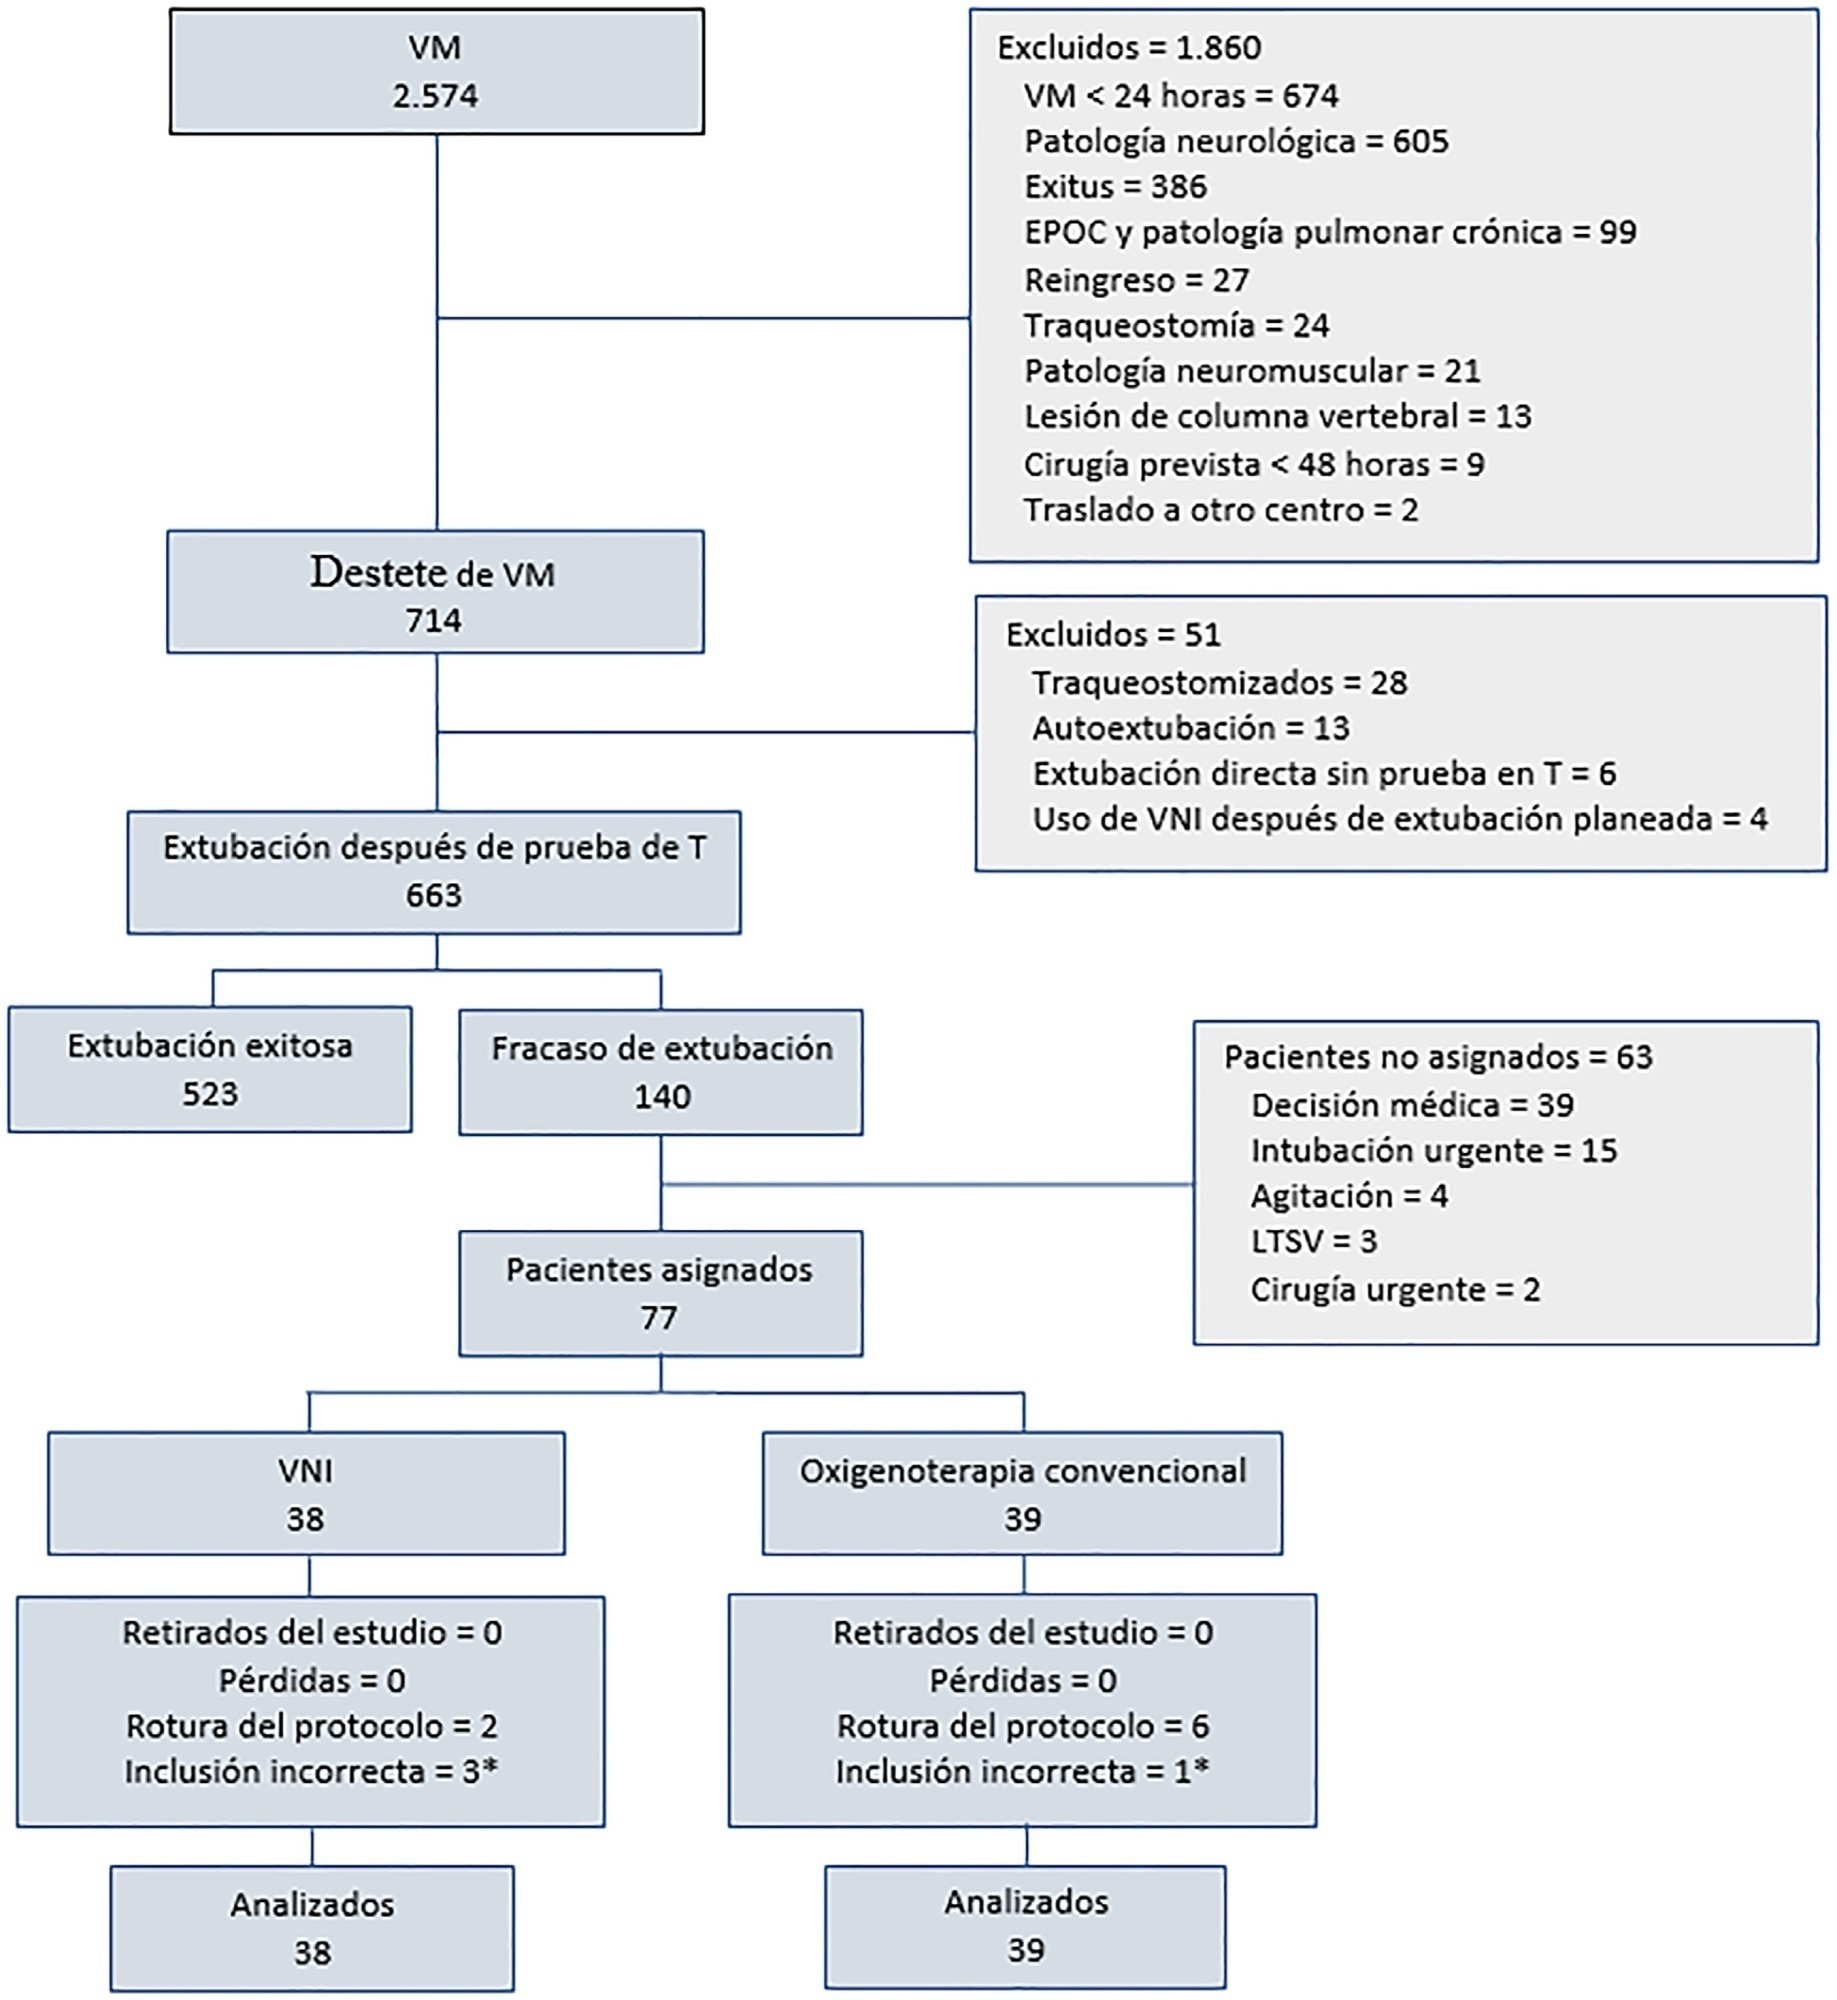 Noninvasive ventilation versus conventional oxygen therapy after extubation failure in high-risk patients in an intensive care unit: a pragmatic clinical trial